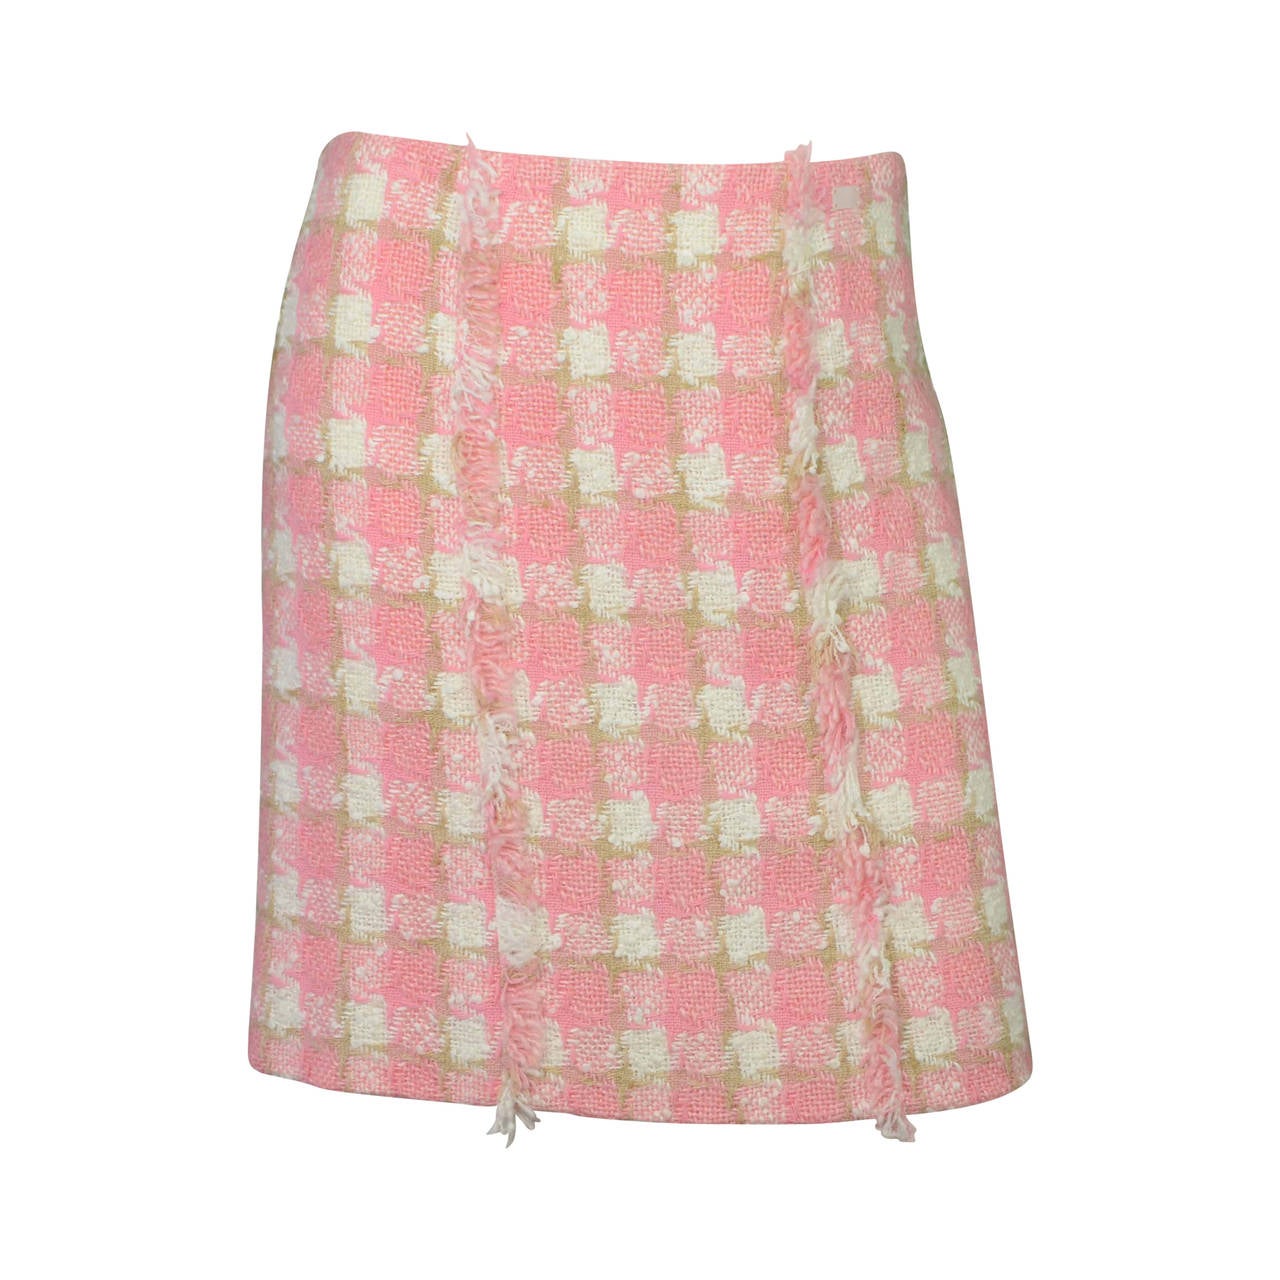 CHANEL Pink and White Houndstooth Tweed Skirt sz 38 at 1stDibs | chanel ...